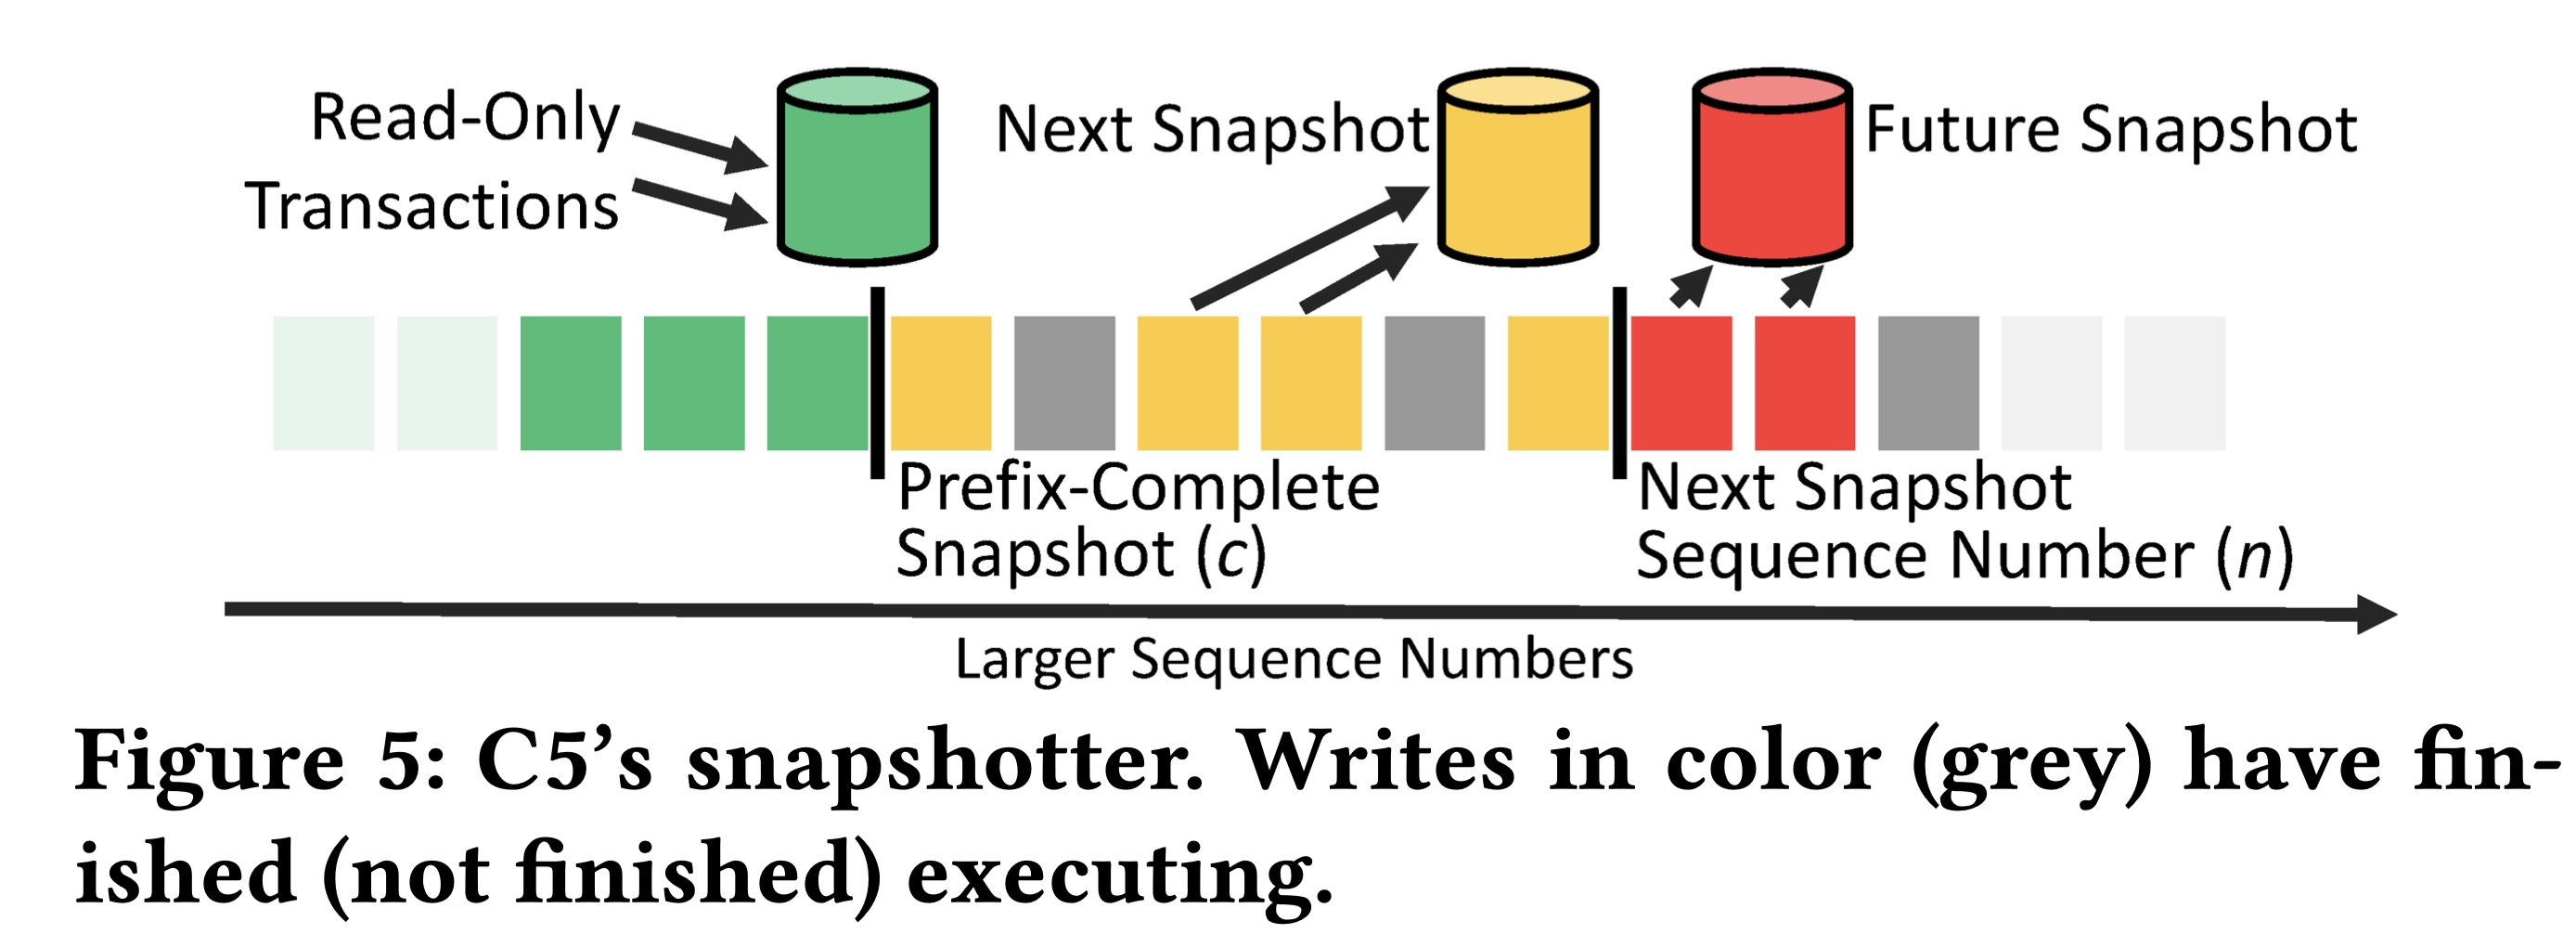 Figure 5 from the paper. On the left, a series of green log entries for the current snapshot. Arrows labeled “read only transactions” point to the current snapshot. In the middle, a series of yellow log entries for the next snapshot. On the right, a series of red log entries for the future snapshot.